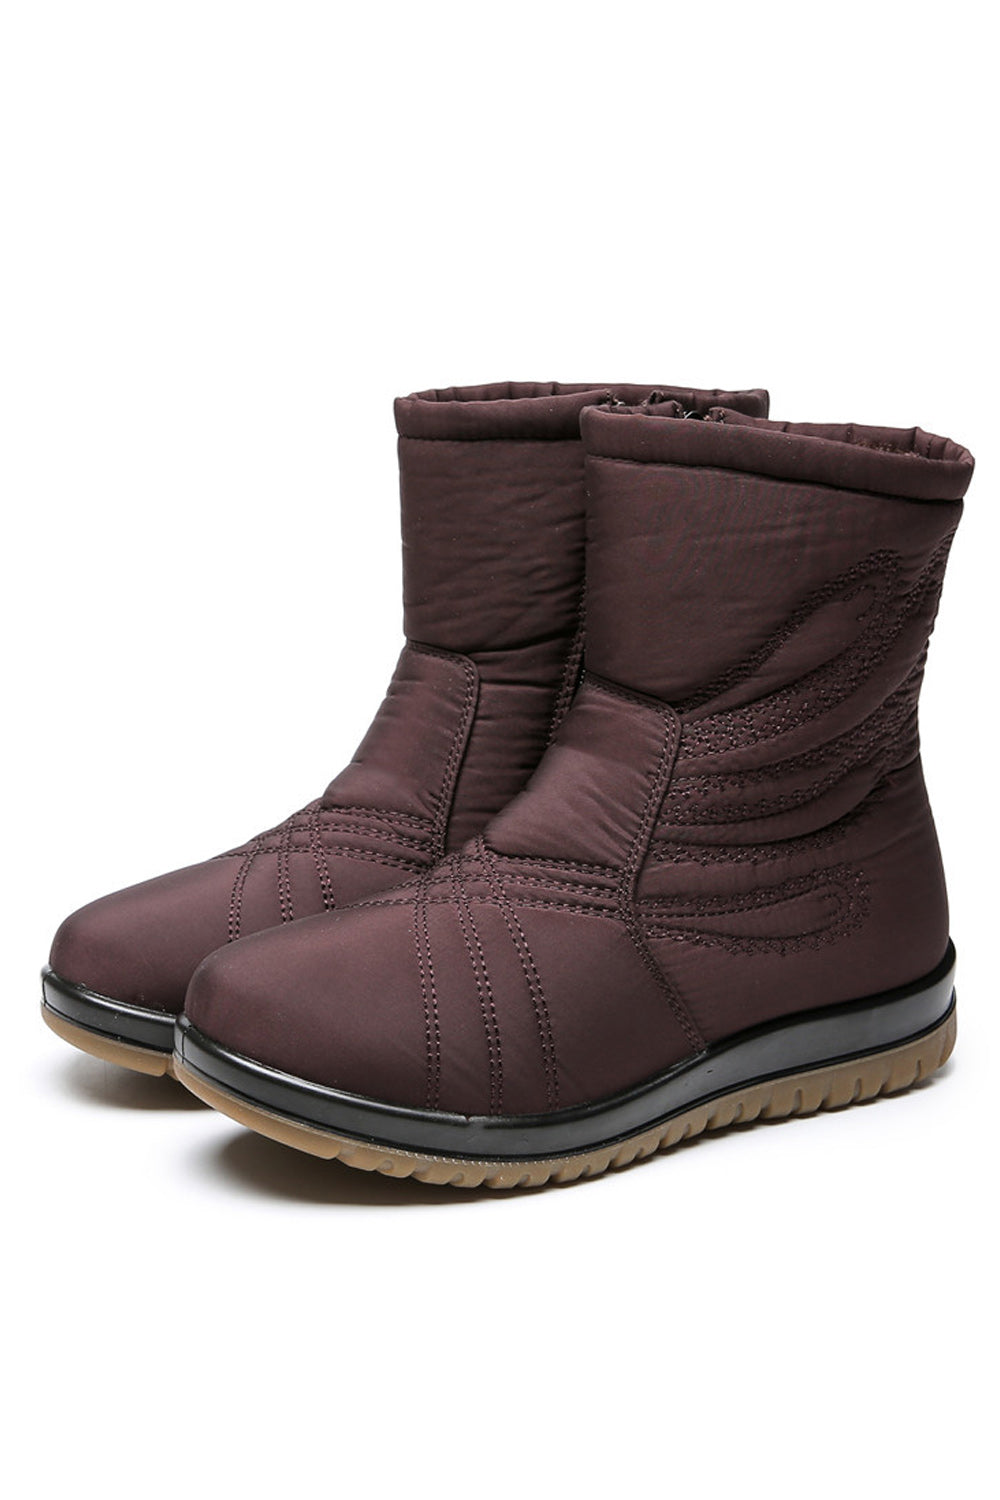 Women Round Toe Lightweight Thick Winter Cozy High Top Waterproof Solid Pattern Boots - WSC50898